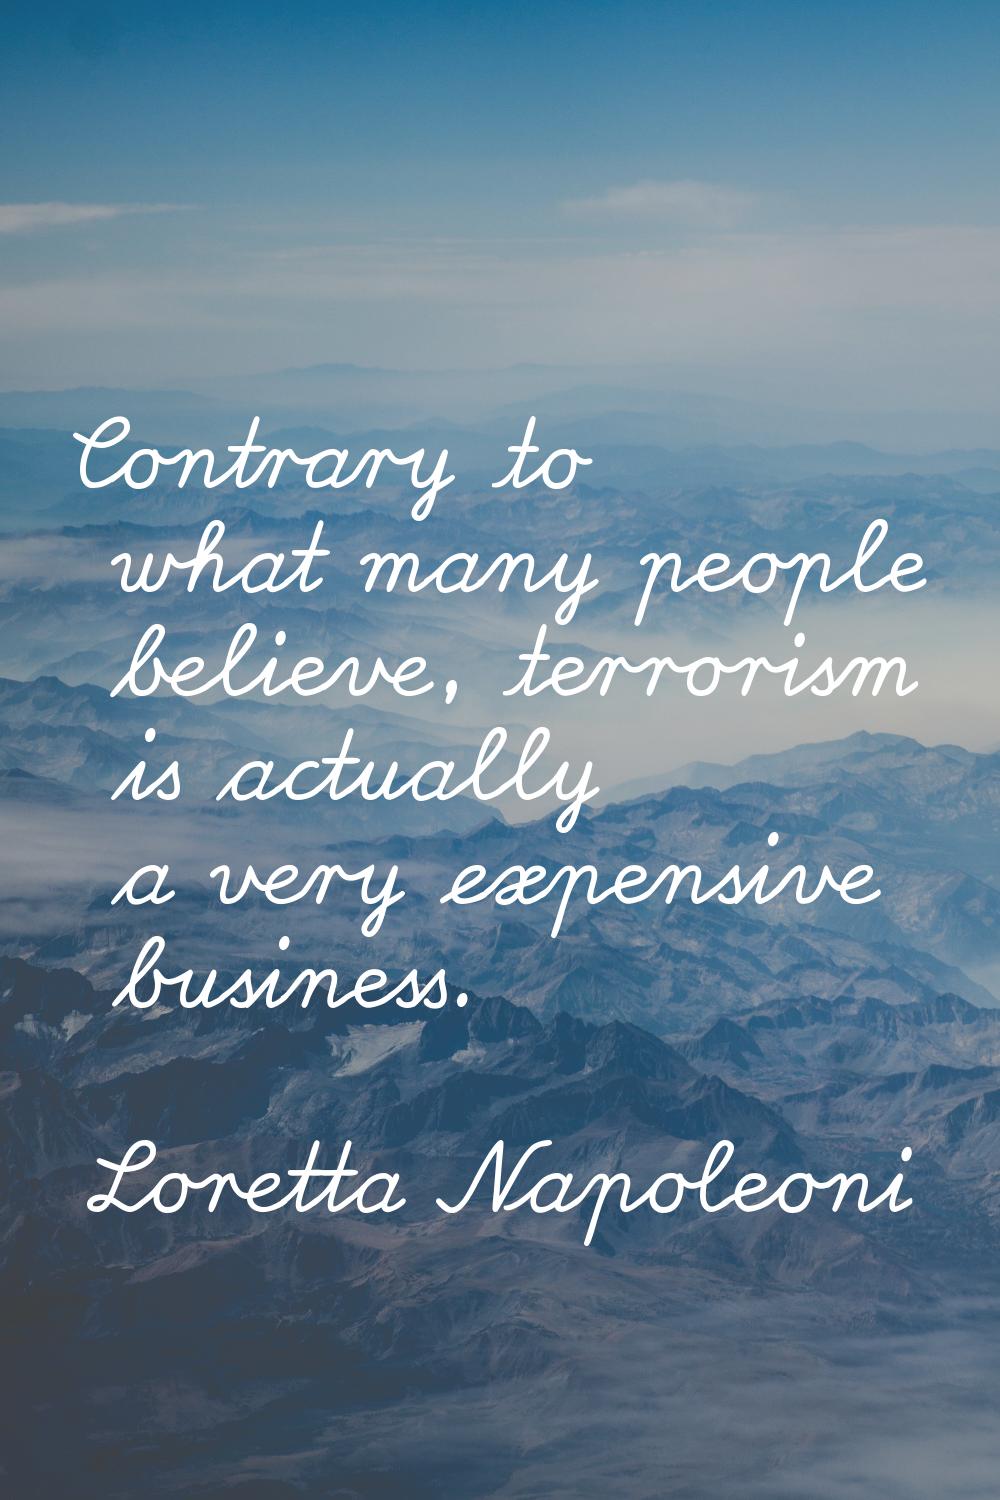 Contrary to what many people believe, terrorism is actually a very expensive business.